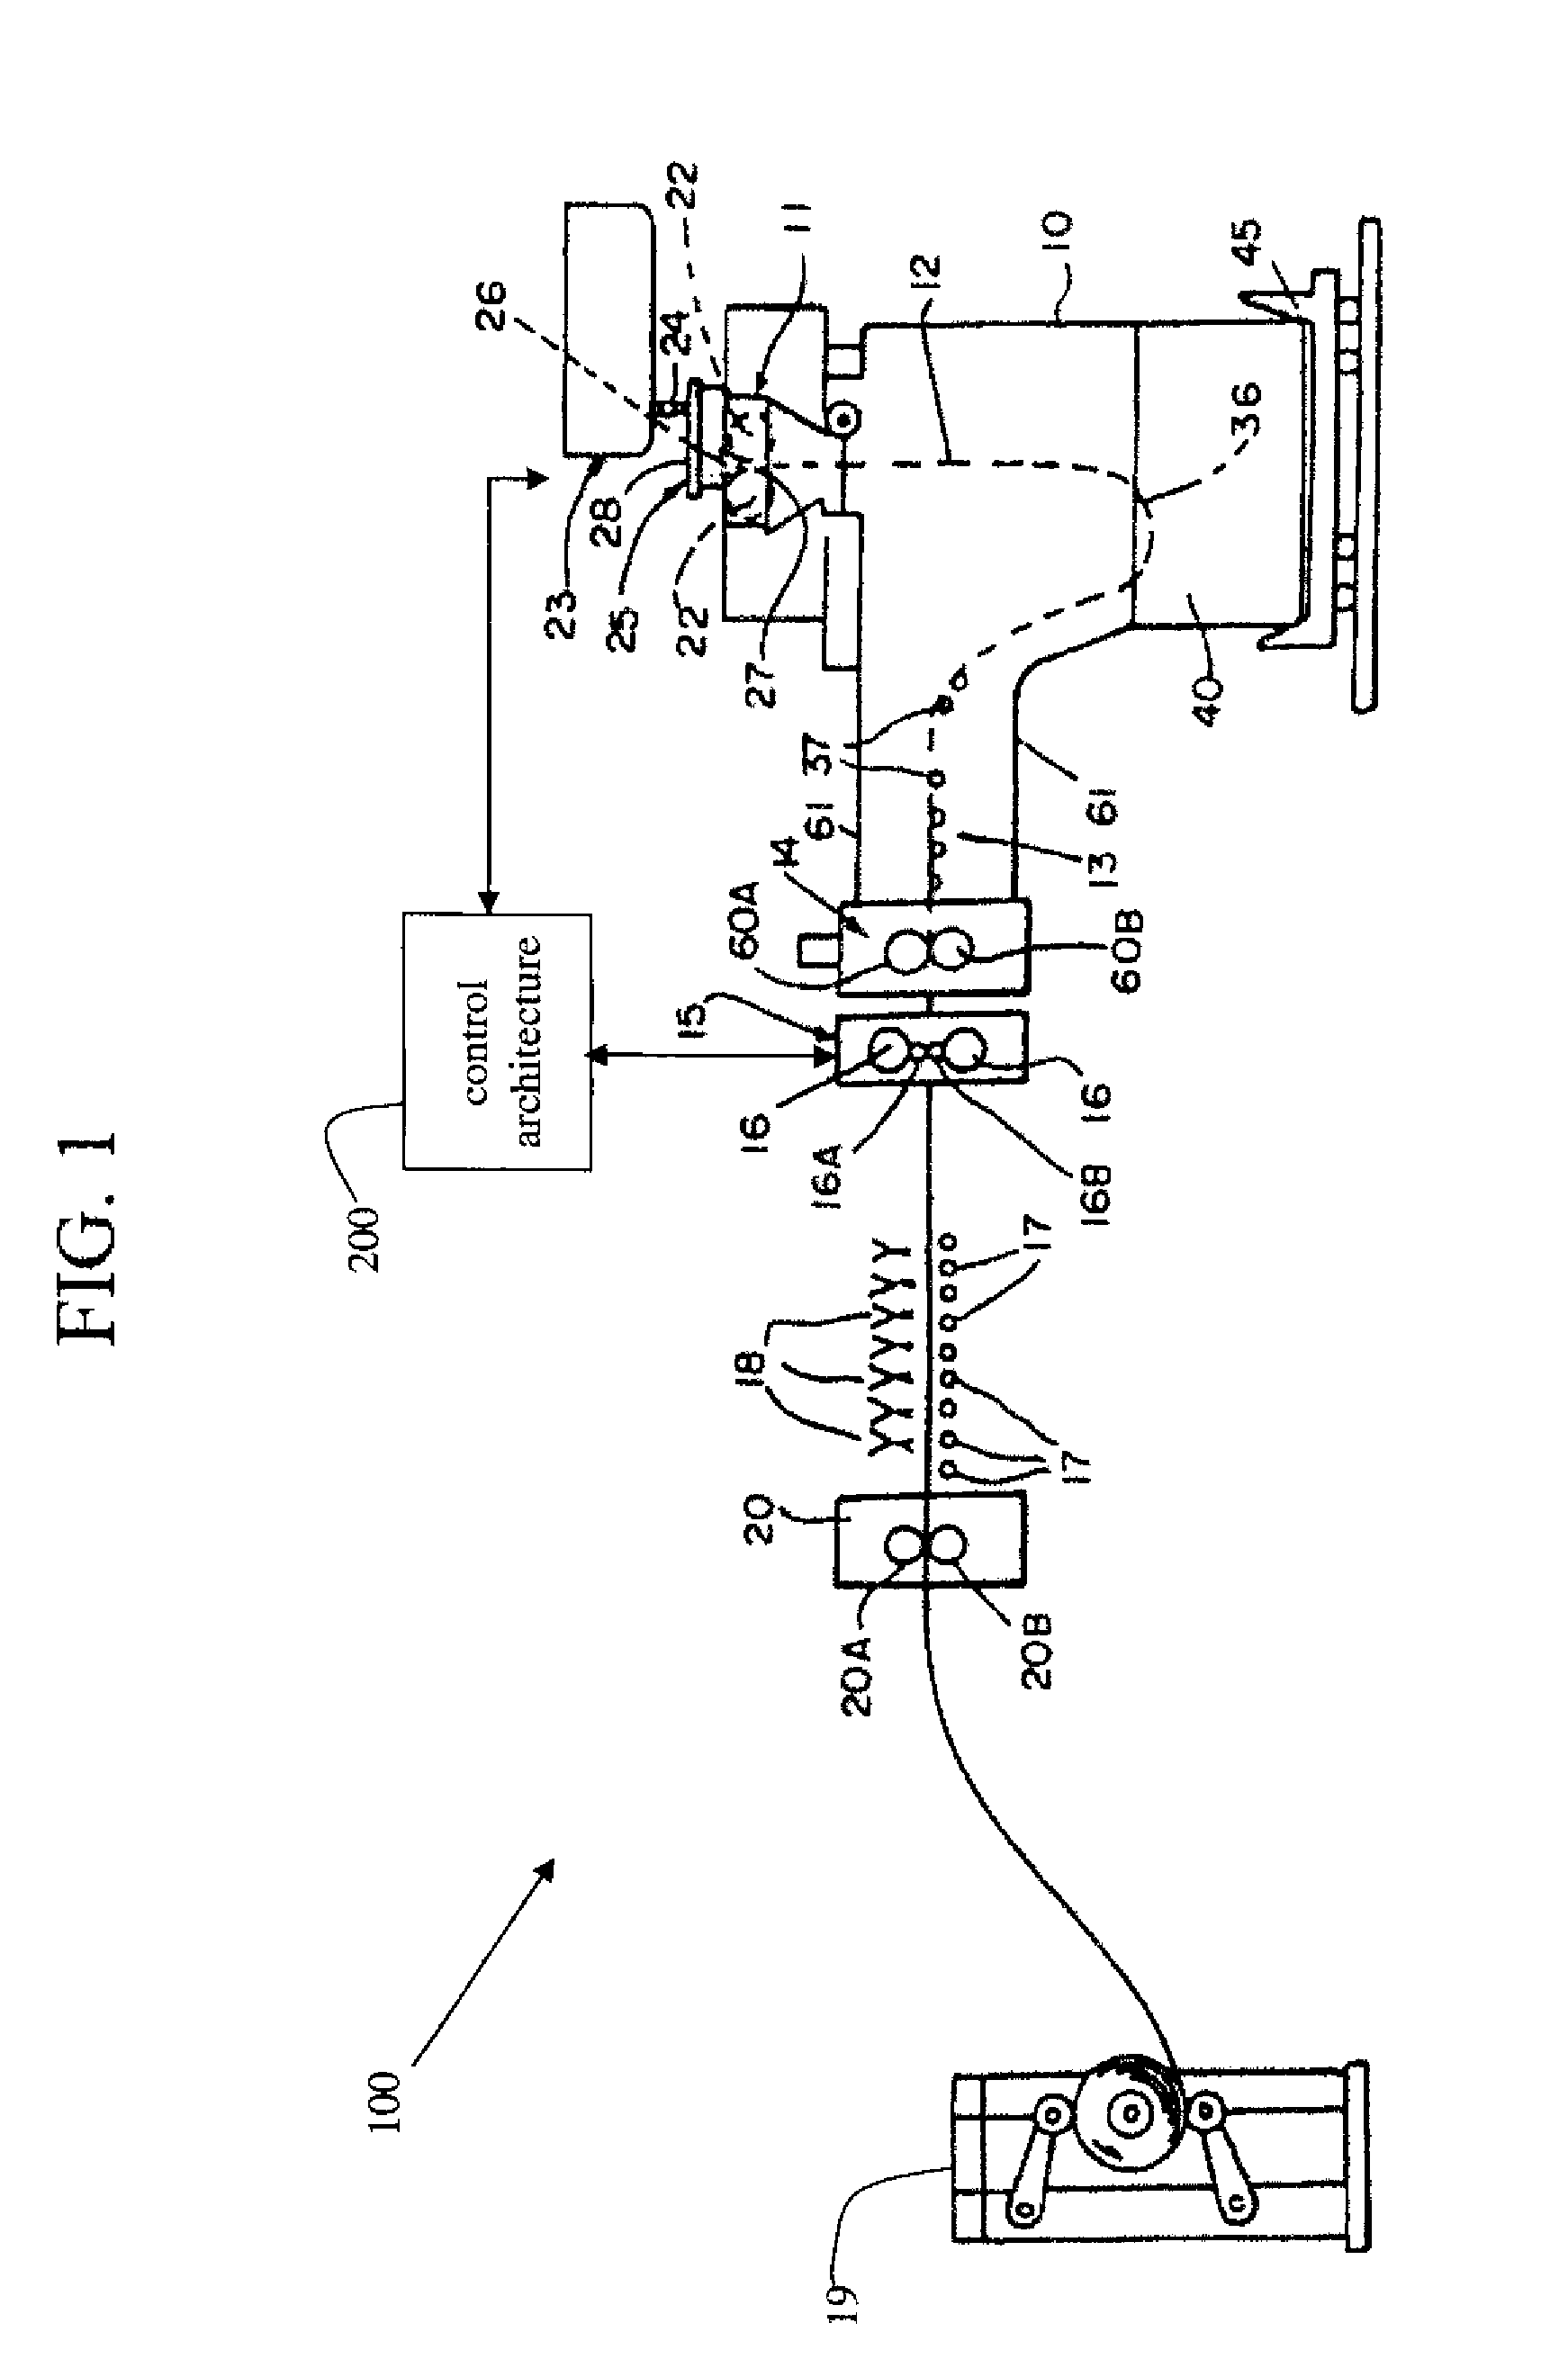 Method and plant for integrated monitoring and control of strip flatness and strip profile